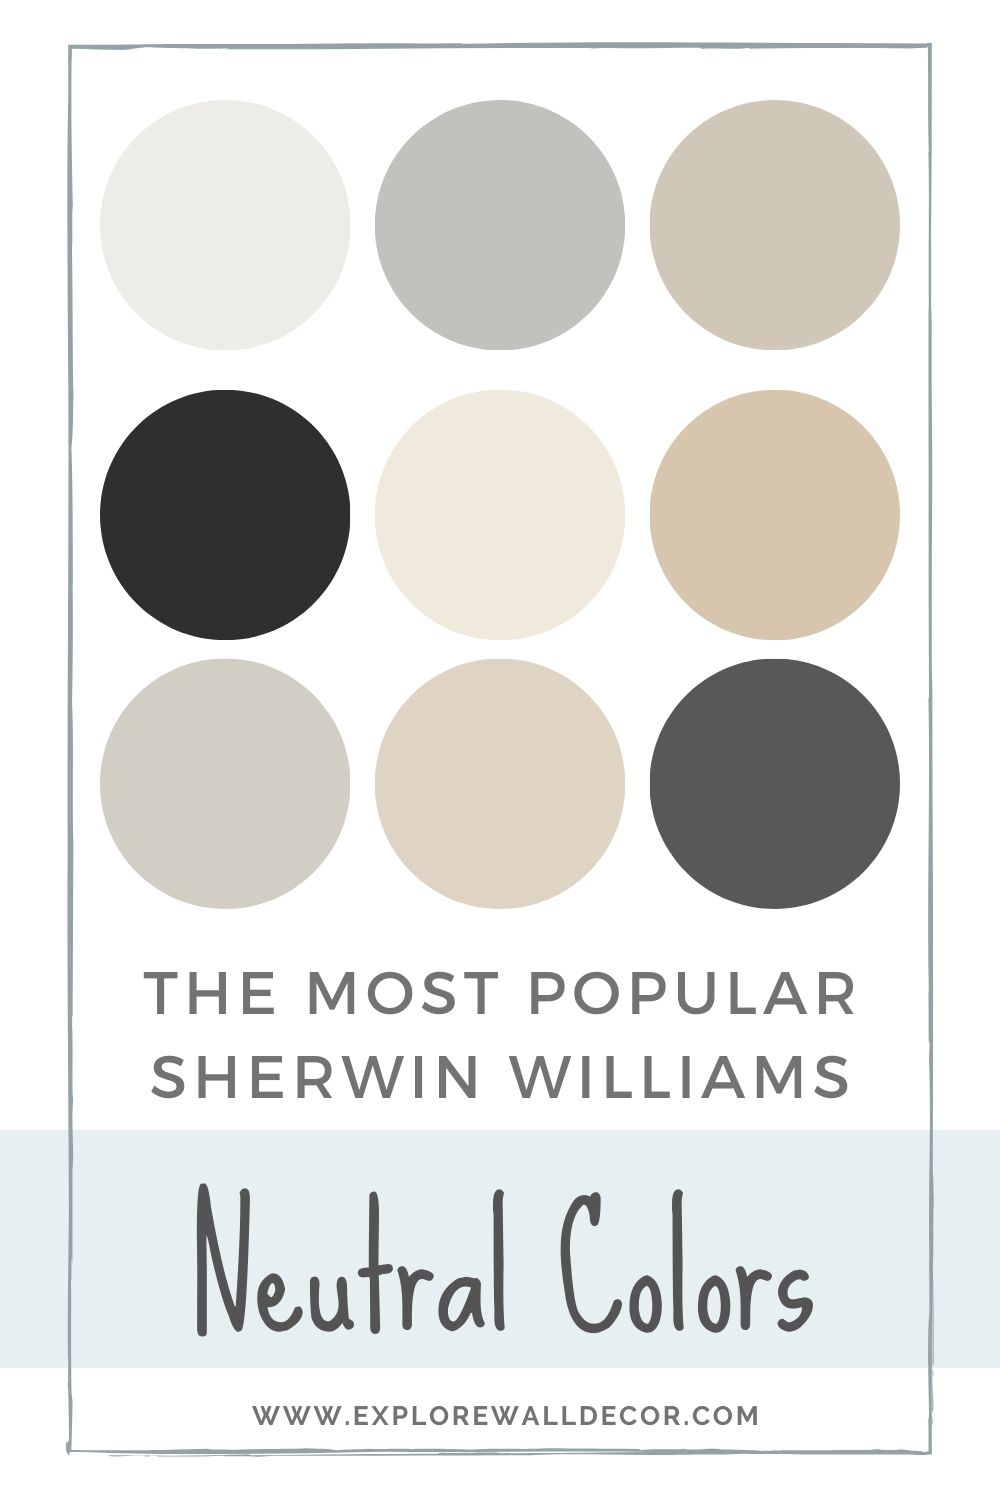 What Are The Most Popular Sherwin Williams Neutral Colors 